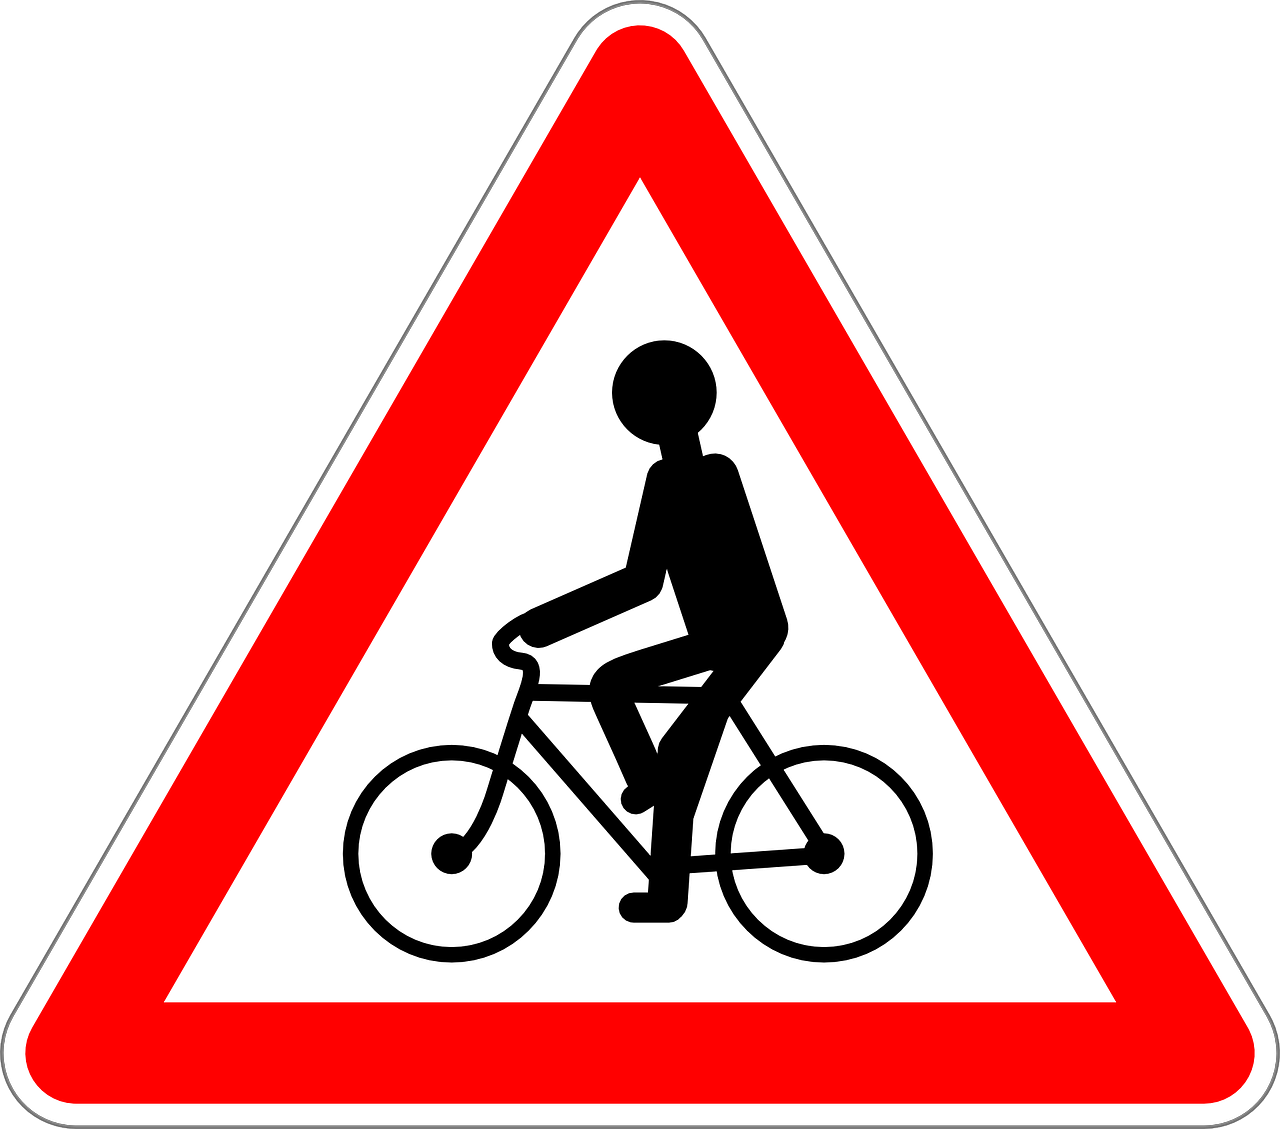 bicycles cycler traffic sign free photo